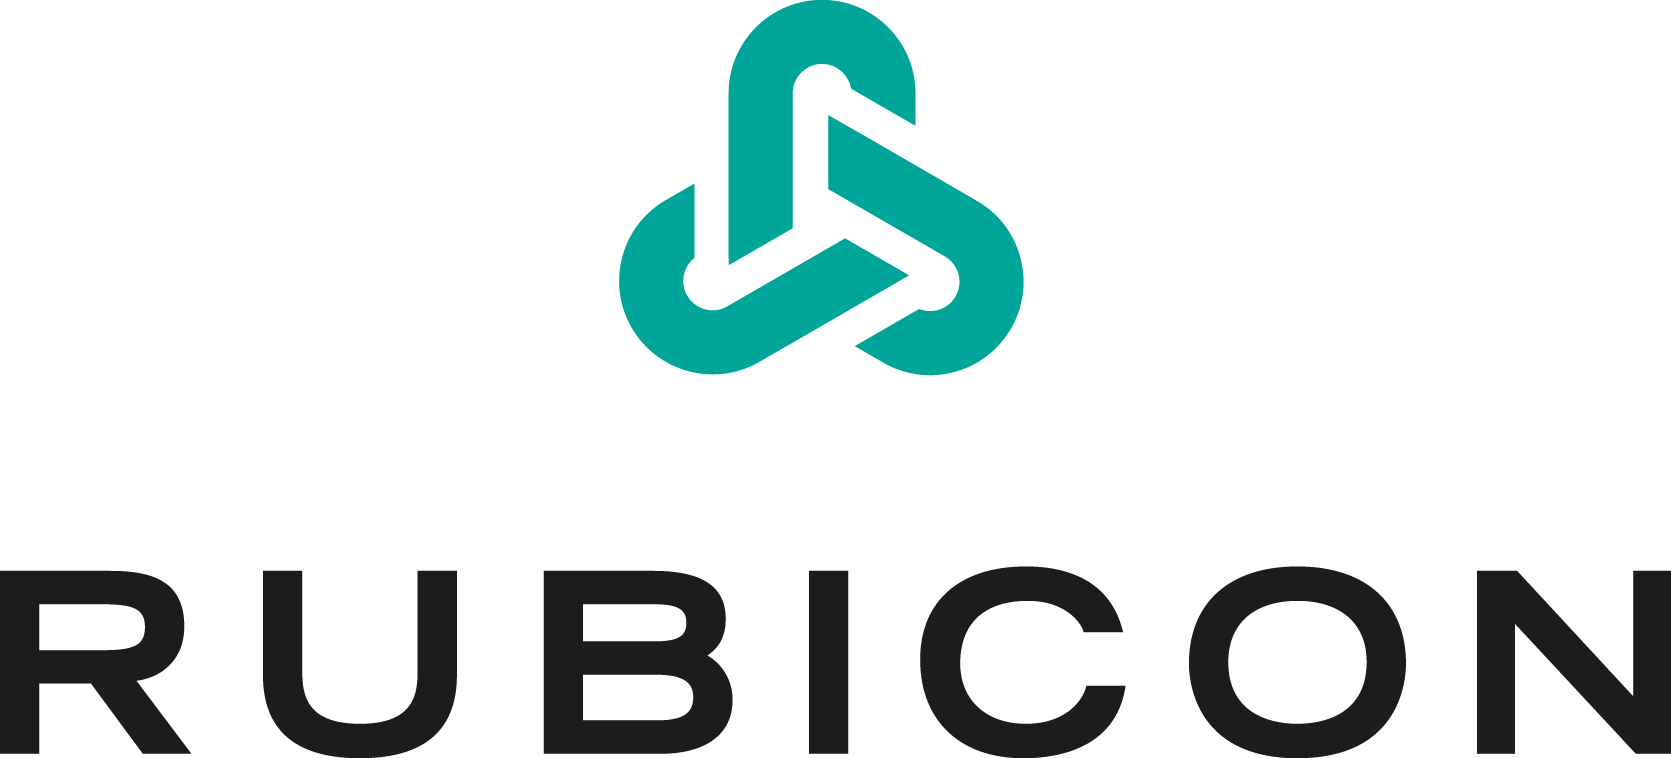 Rubicon Logo - Rubicon Global | Waste Management Company and Recycling Platform